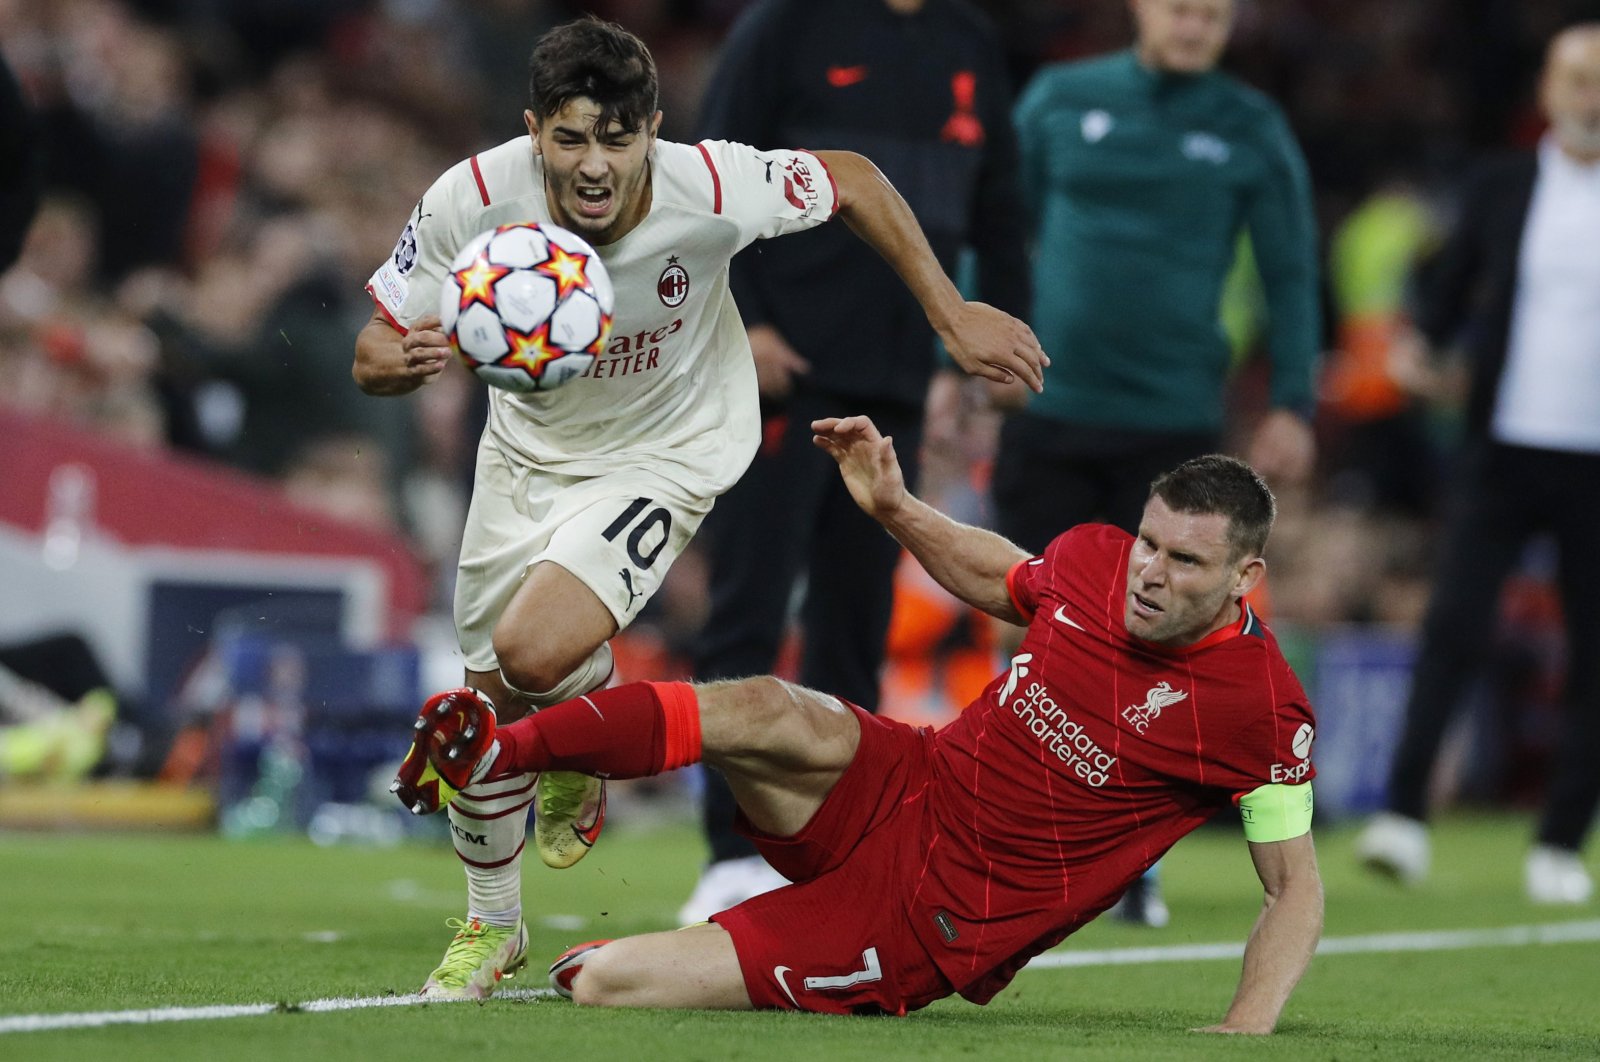 AC Milan's Brahim Diaz in action with Liverpool's James Milner during a Champions League match at Anfield, Liverpool, England, Sept. 15, 2021.